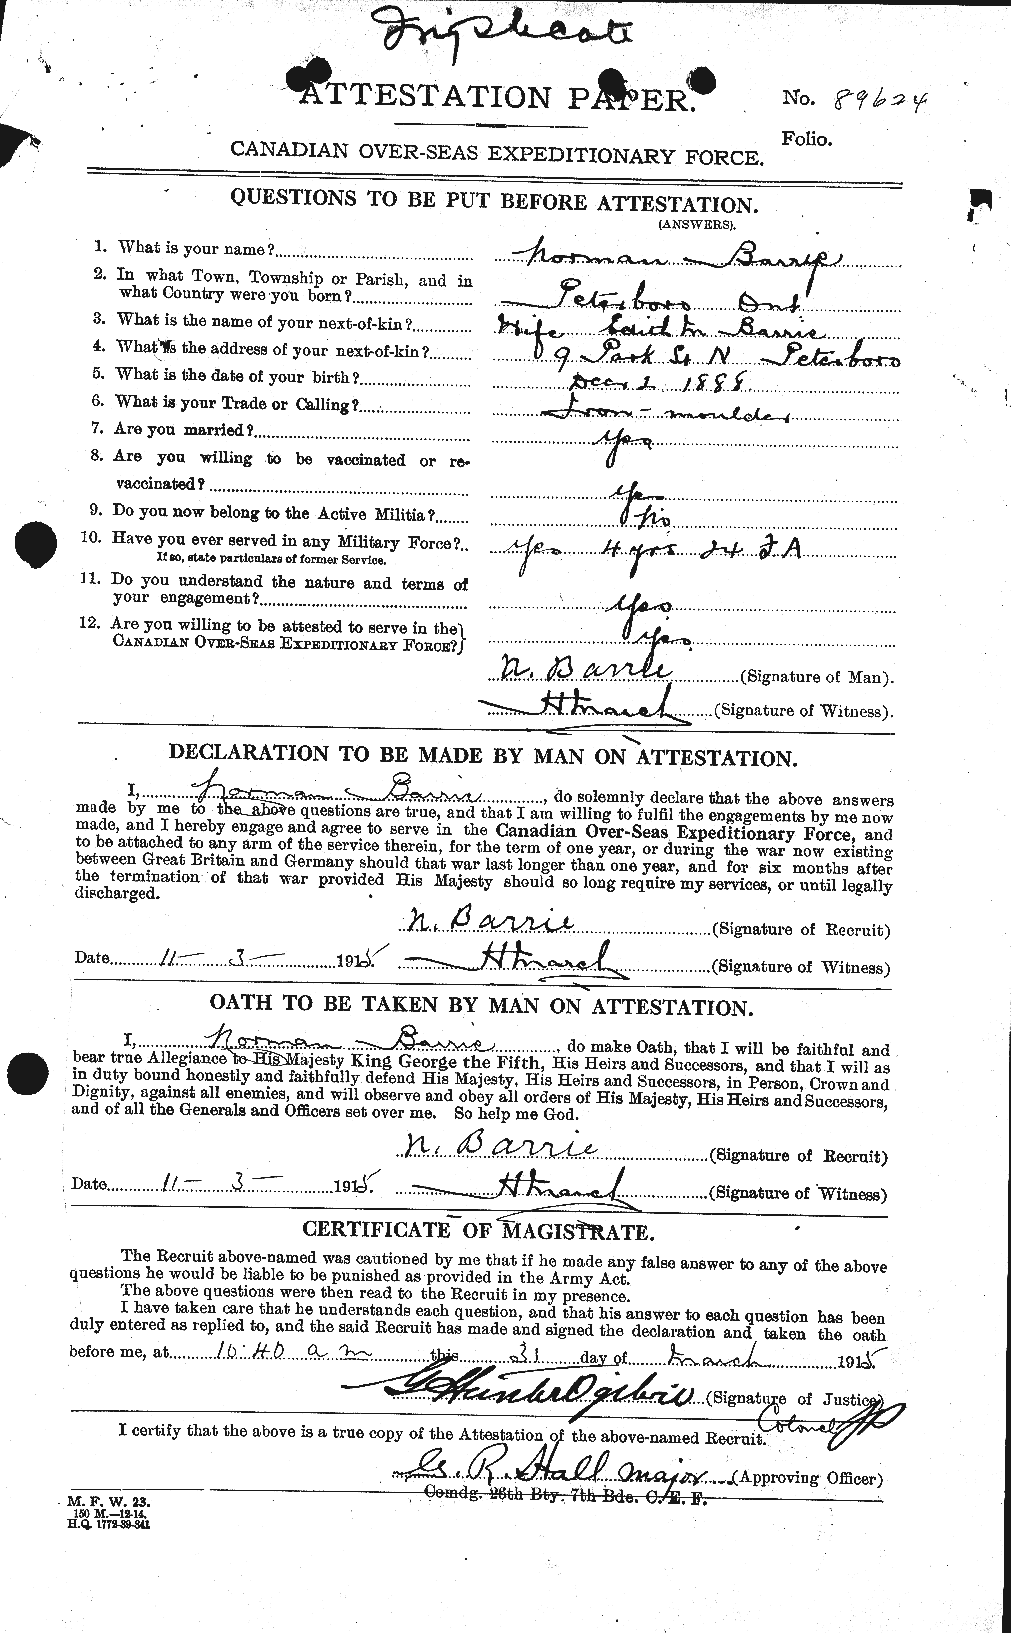 Personnel Records of the First World War - CEF 220030a